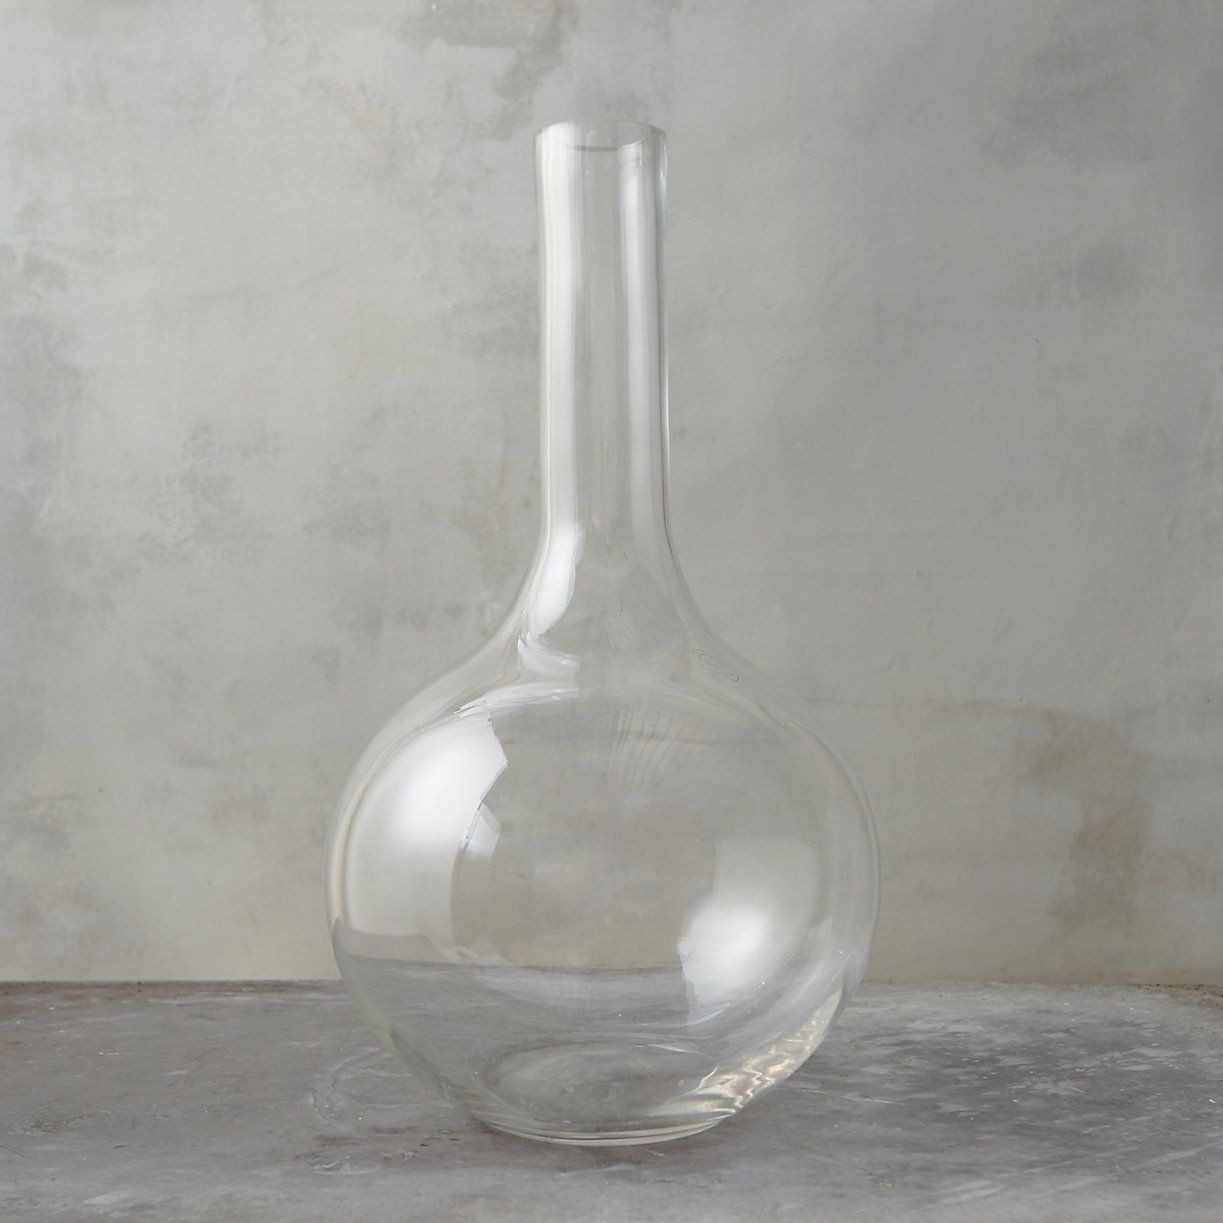 15 Recommended West Elm Honeycomb Vase 2024 free download west elm honeycomb vase of glass single stem vase kitchen dining area pinterest dining within this glass vase with its elegant and understated shape allows a single flower or faux branch to 